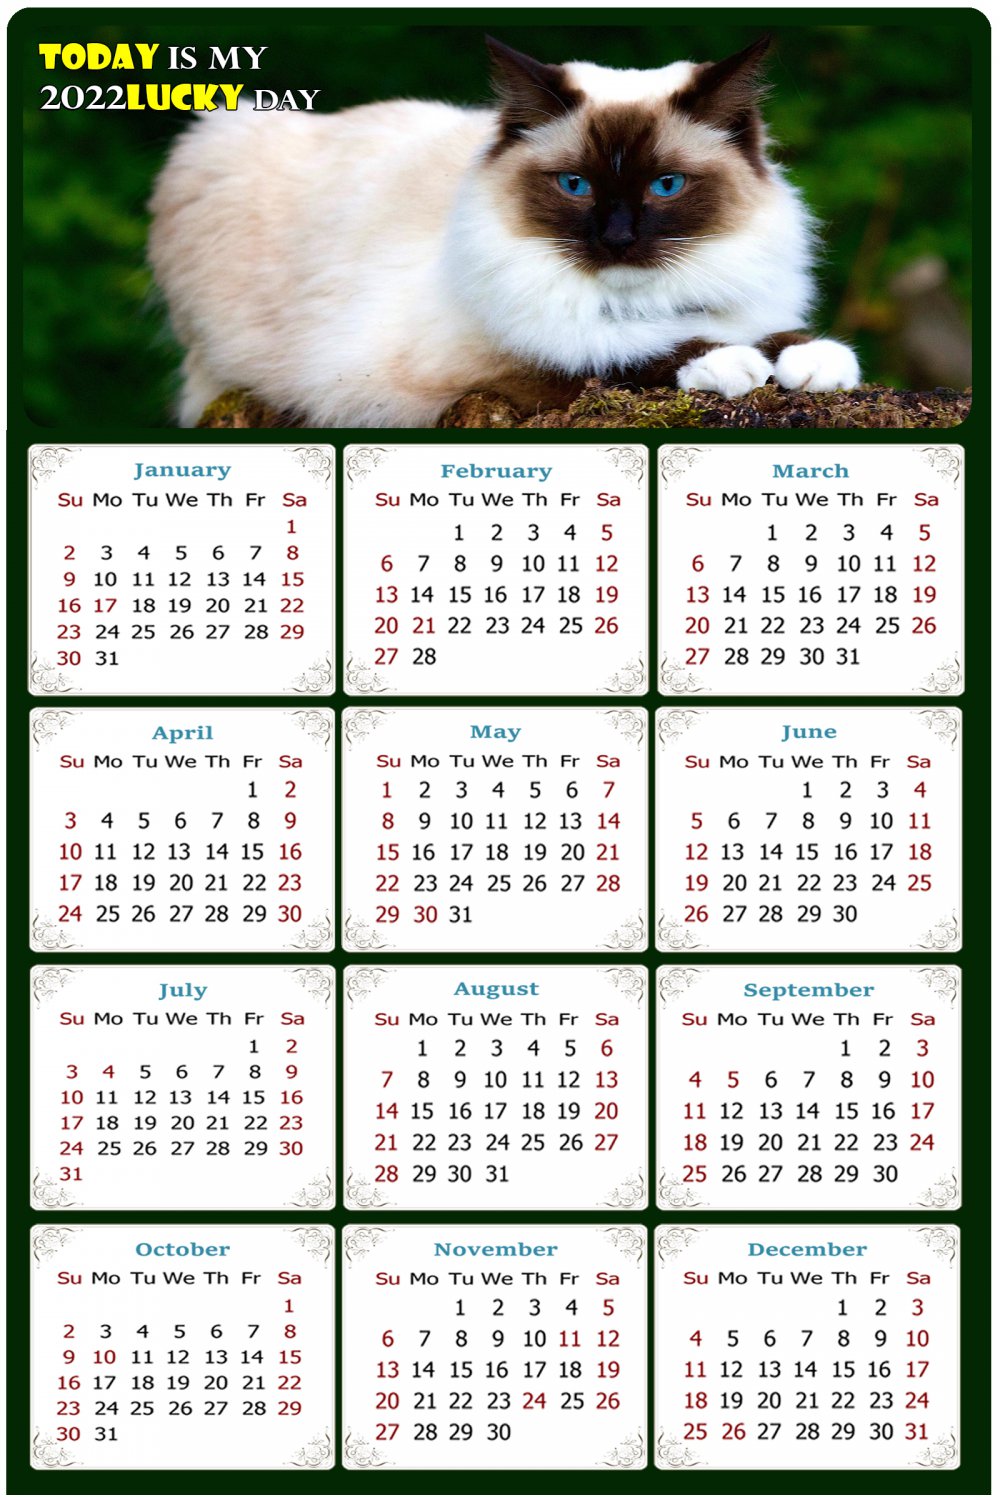 2022 Magnetic Calendar - Calendar Magnets - Today is My Lucky Day - Cat Themed 02 (8 x10)